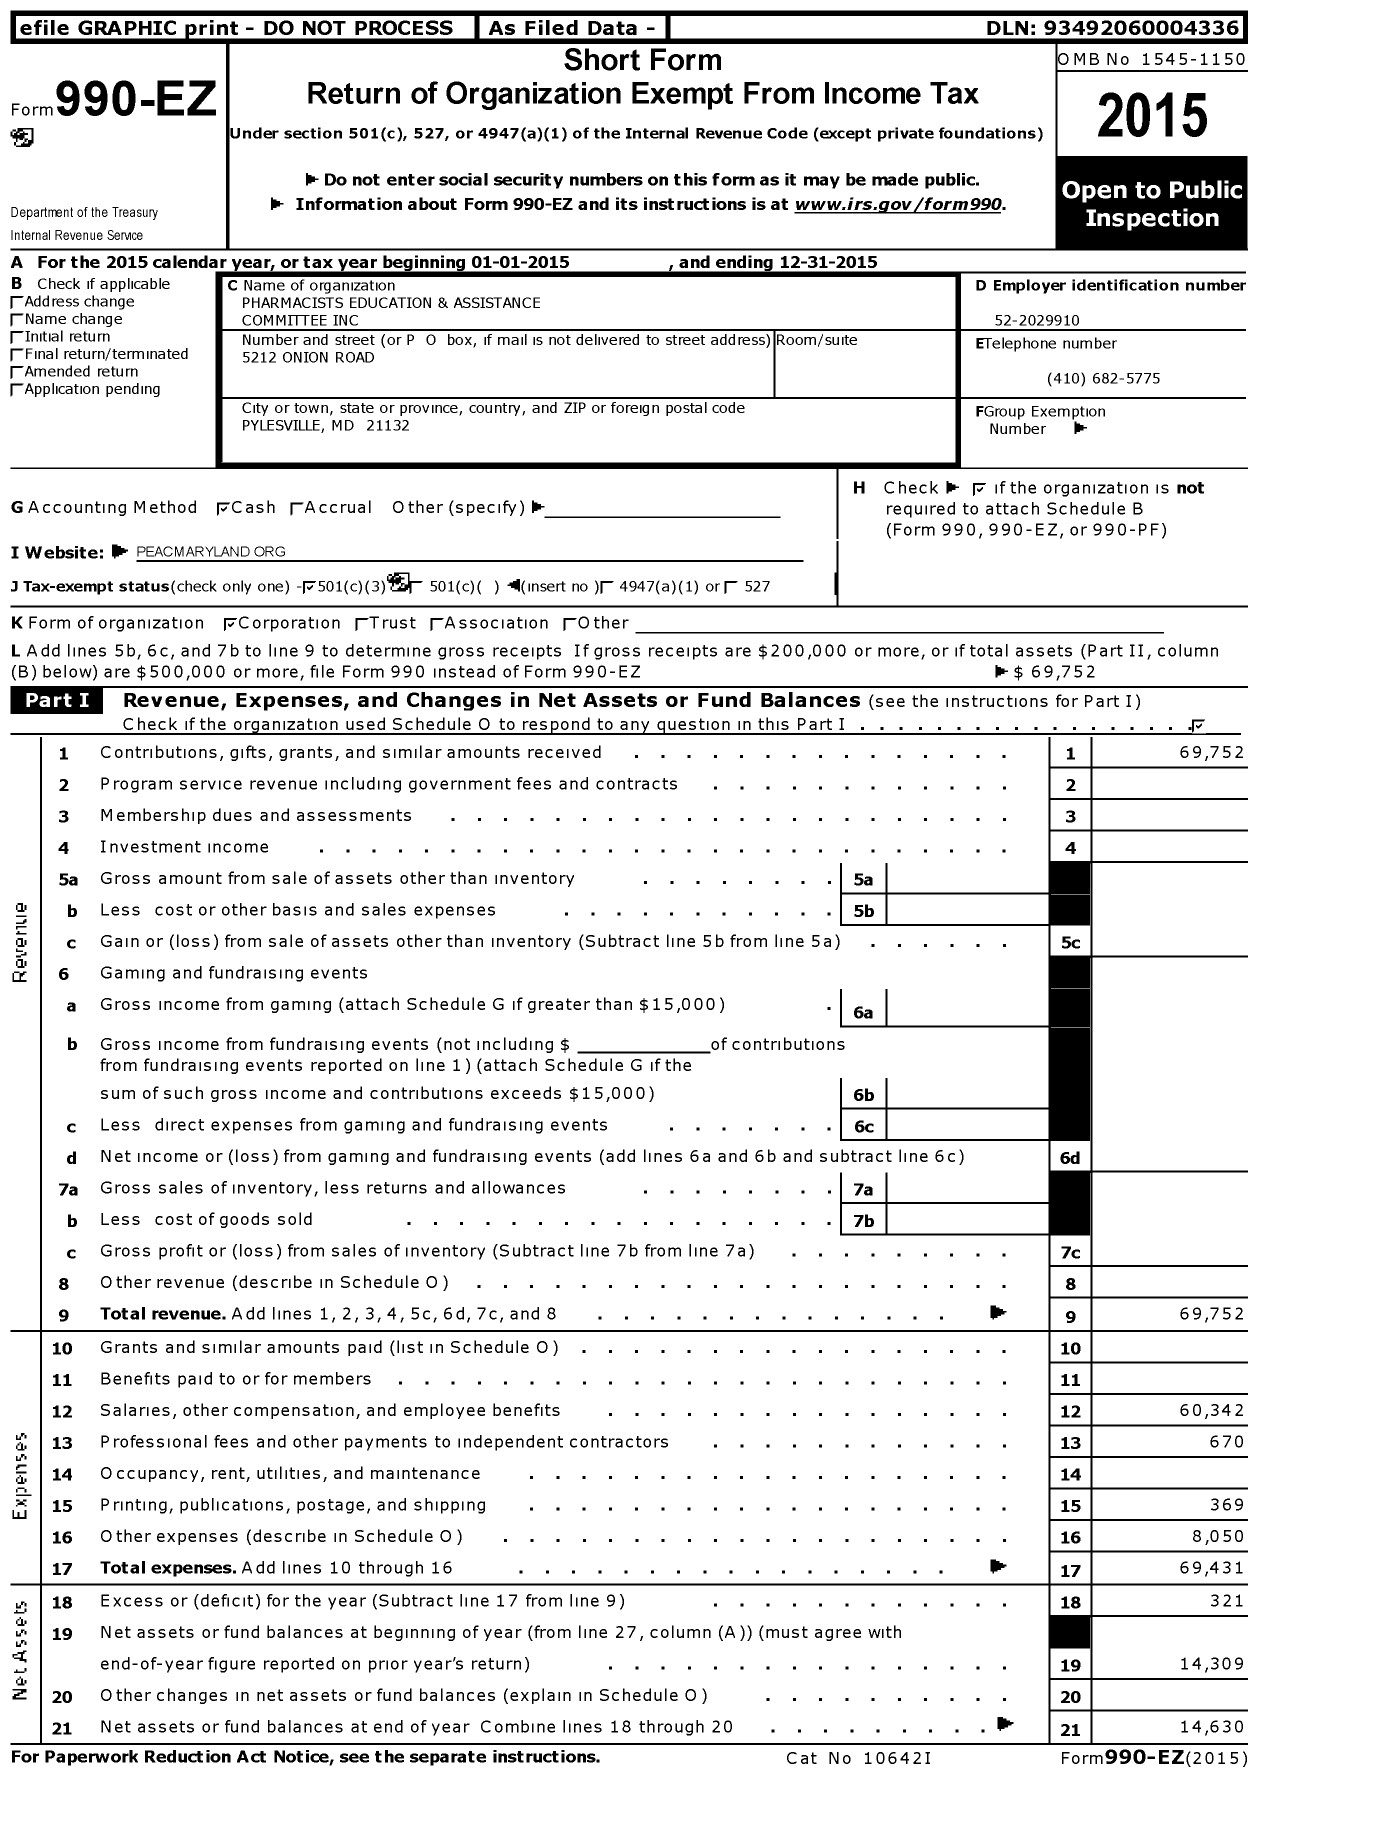 Image of first page of 2015 Form 990EZ for Pharmacists Education and Assistance Committee